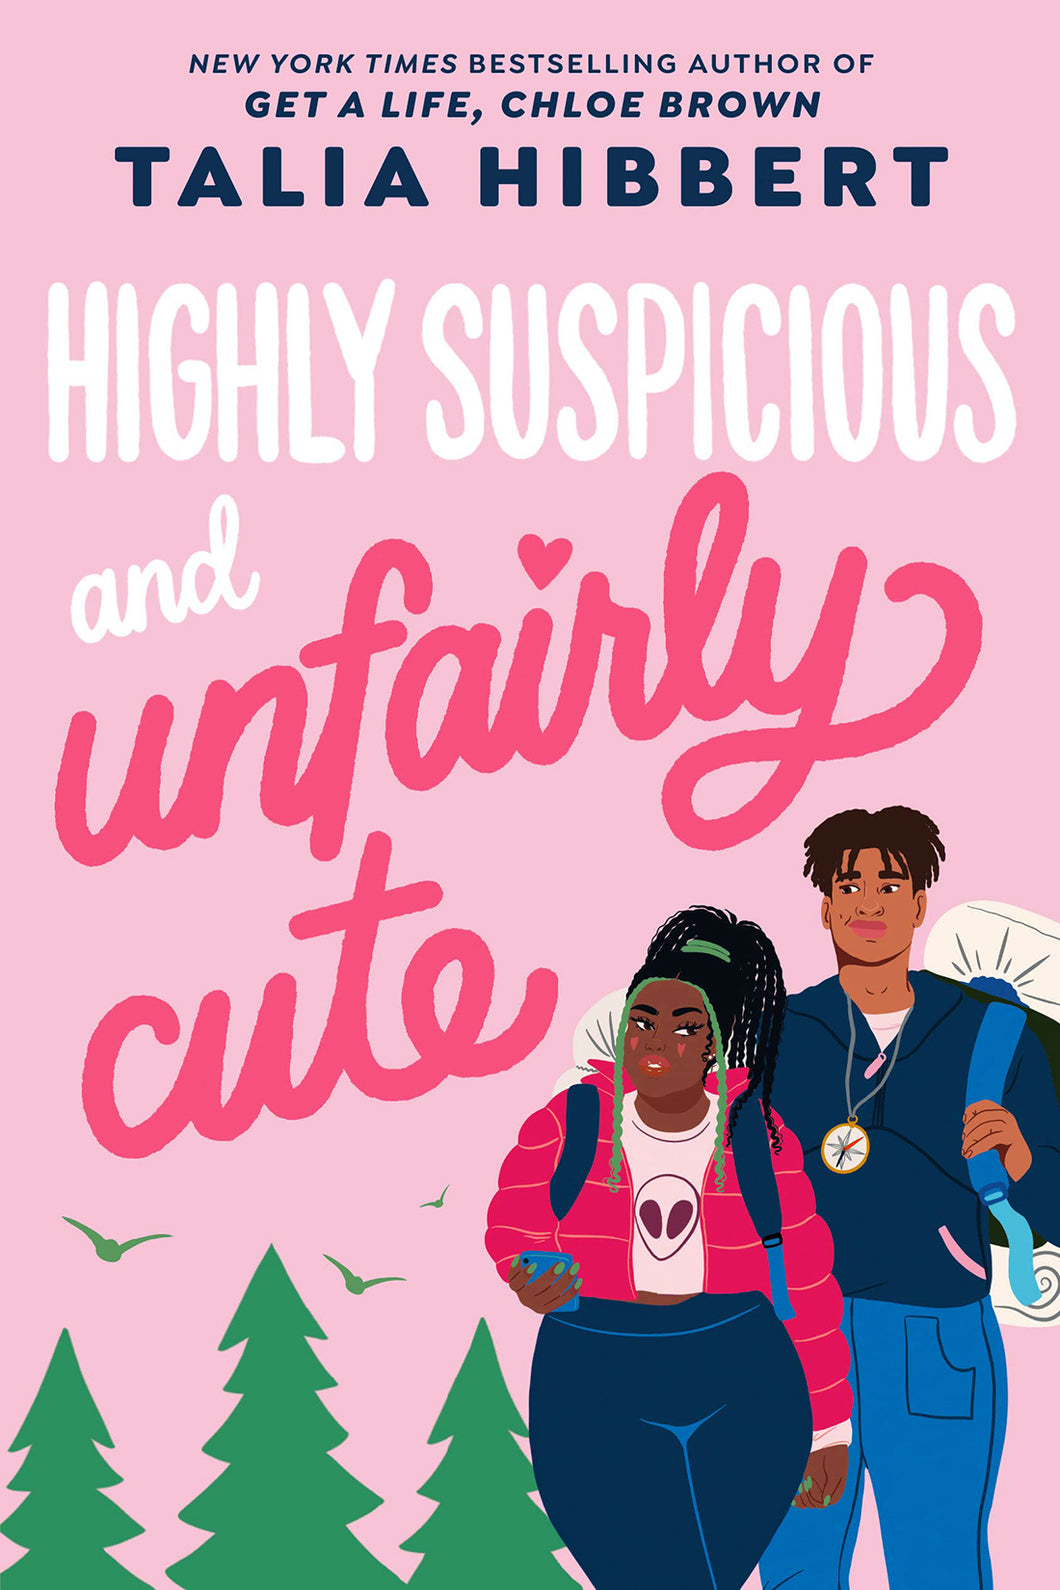 Highly Suspicious and Unfairly Cute by Talia Hibbert / Hardcover or Paperback - NEW BOOK